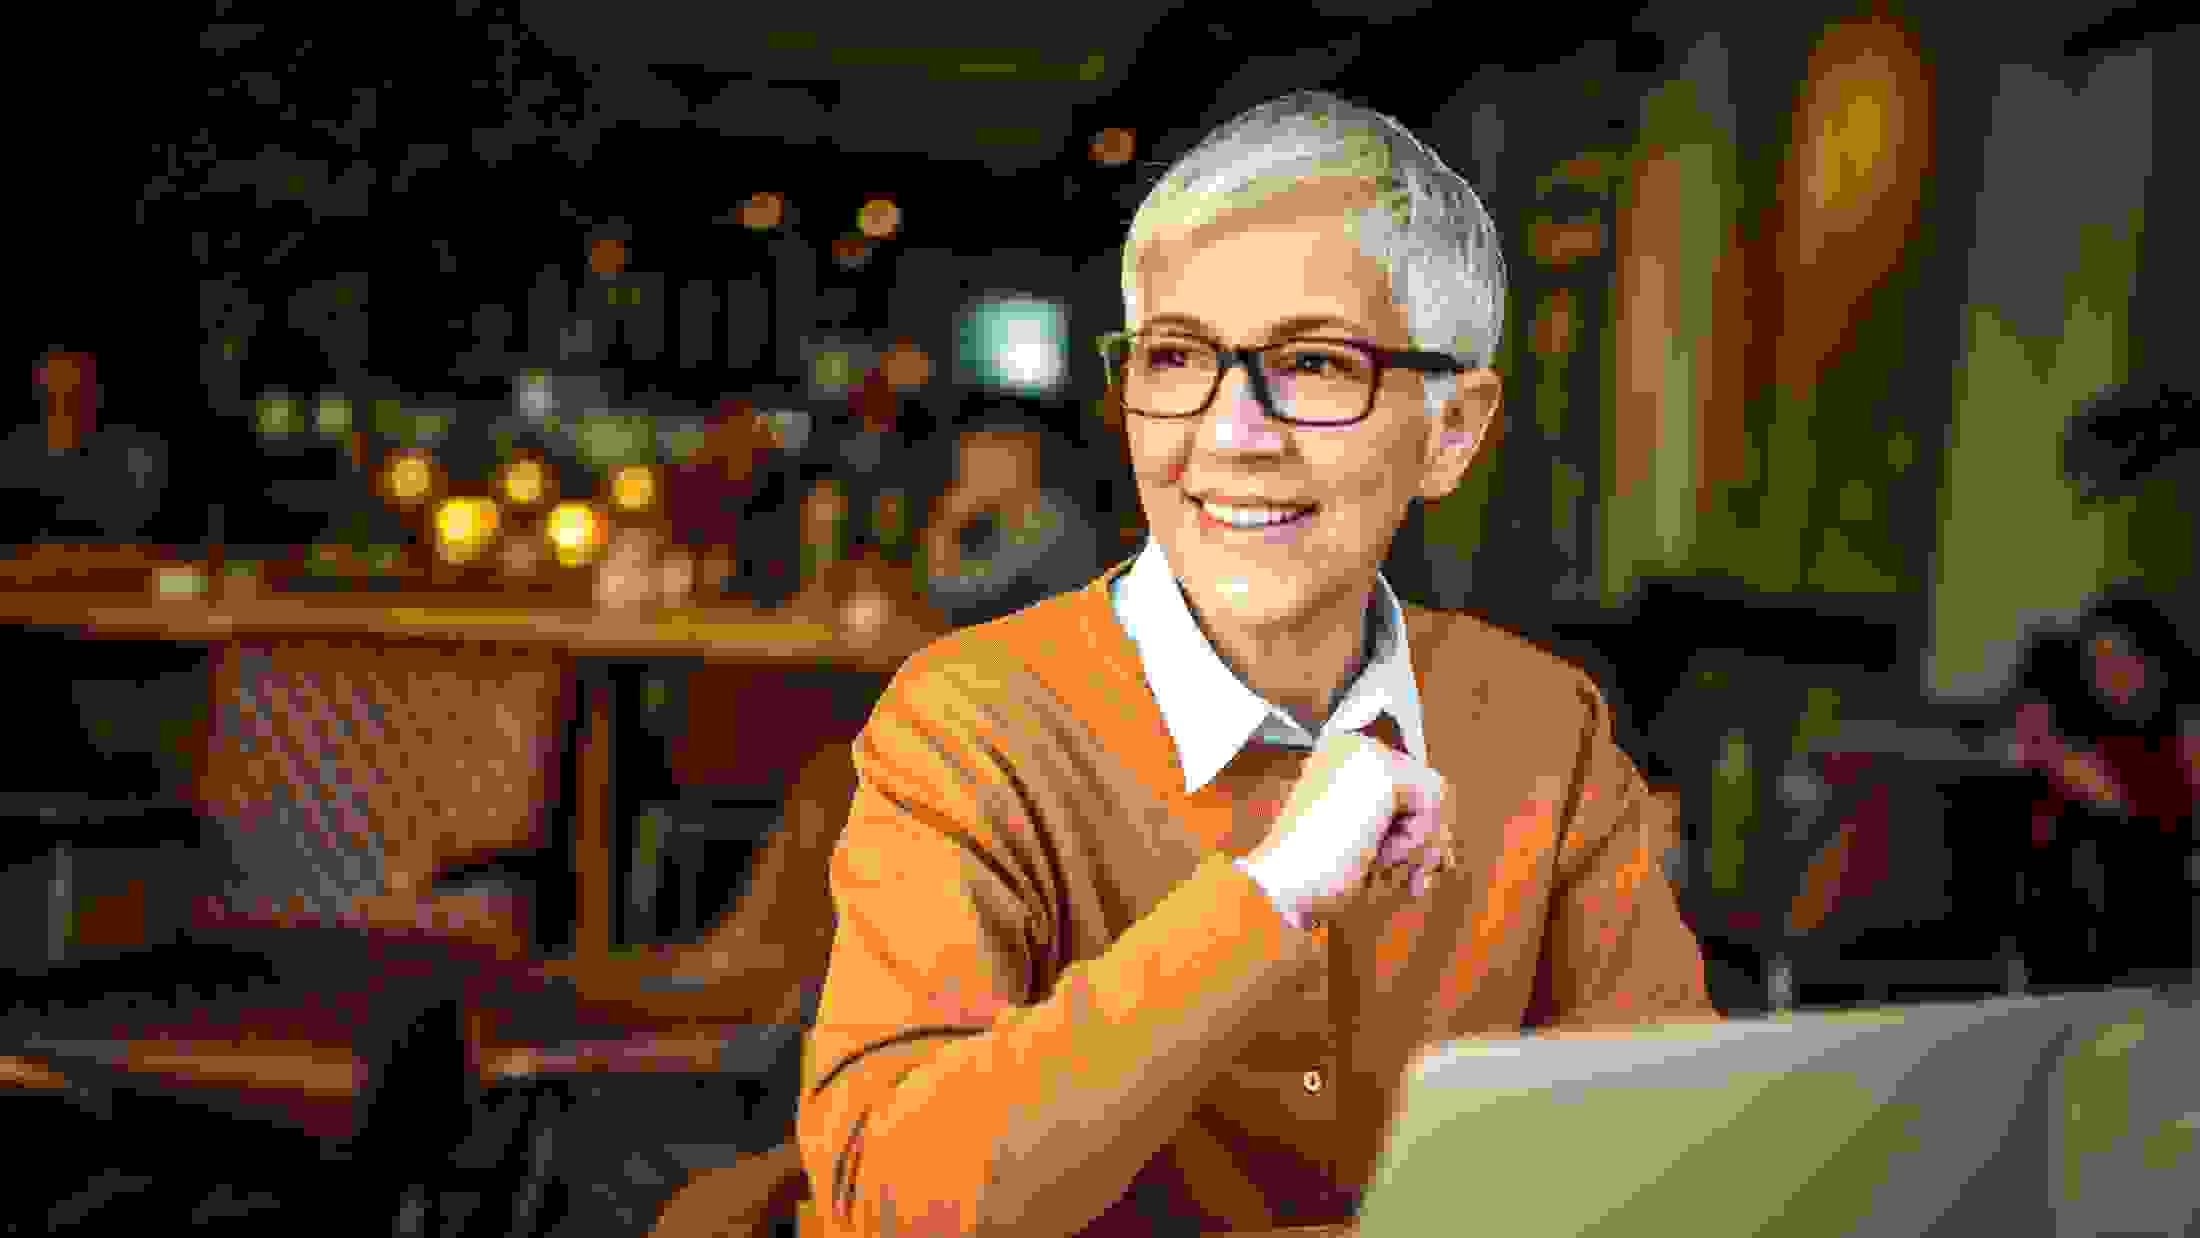 Middle aged woman with short hair and glasses wearing an orange jumper using her laptop while in a coffee shop